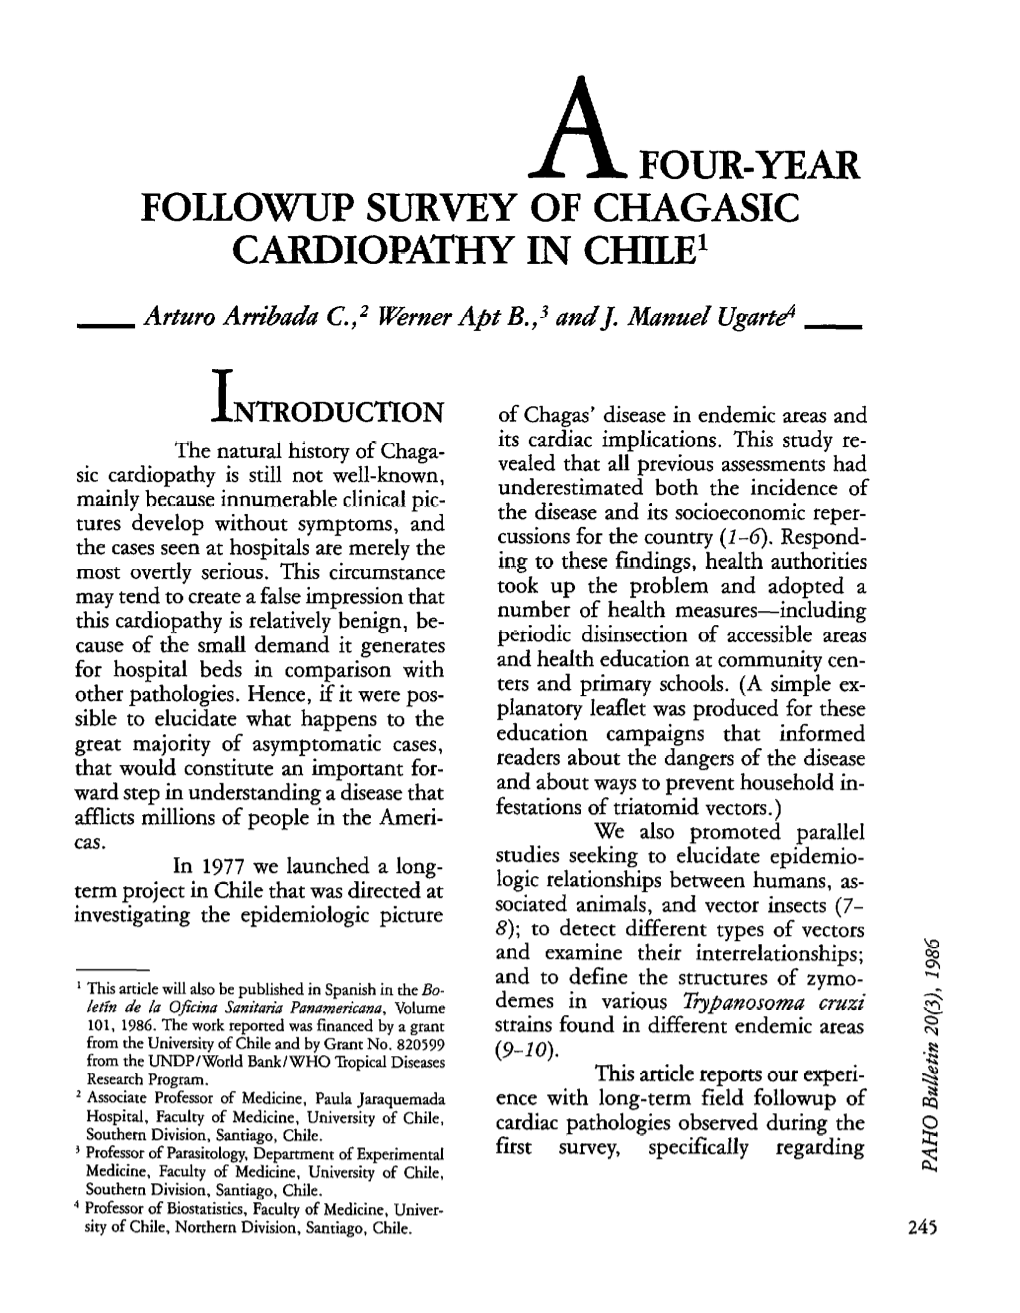 A Four-Year Follow-Upsurvey of Chagasic Cardiopathy in Chile1